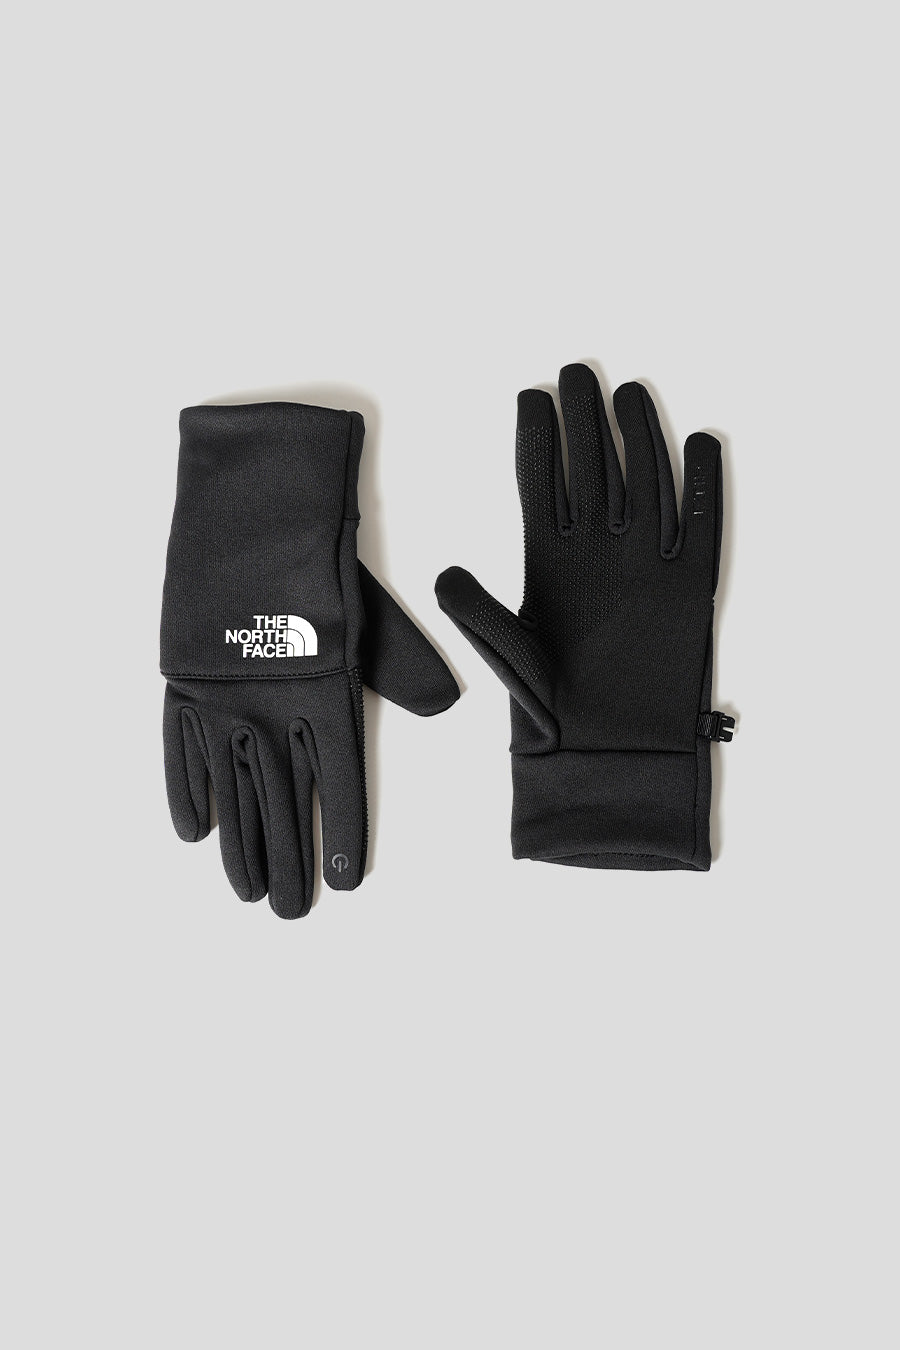 The North Face - BLACK AND WHITE ETIP RECYCLED GLOVES - LE LABO STORE